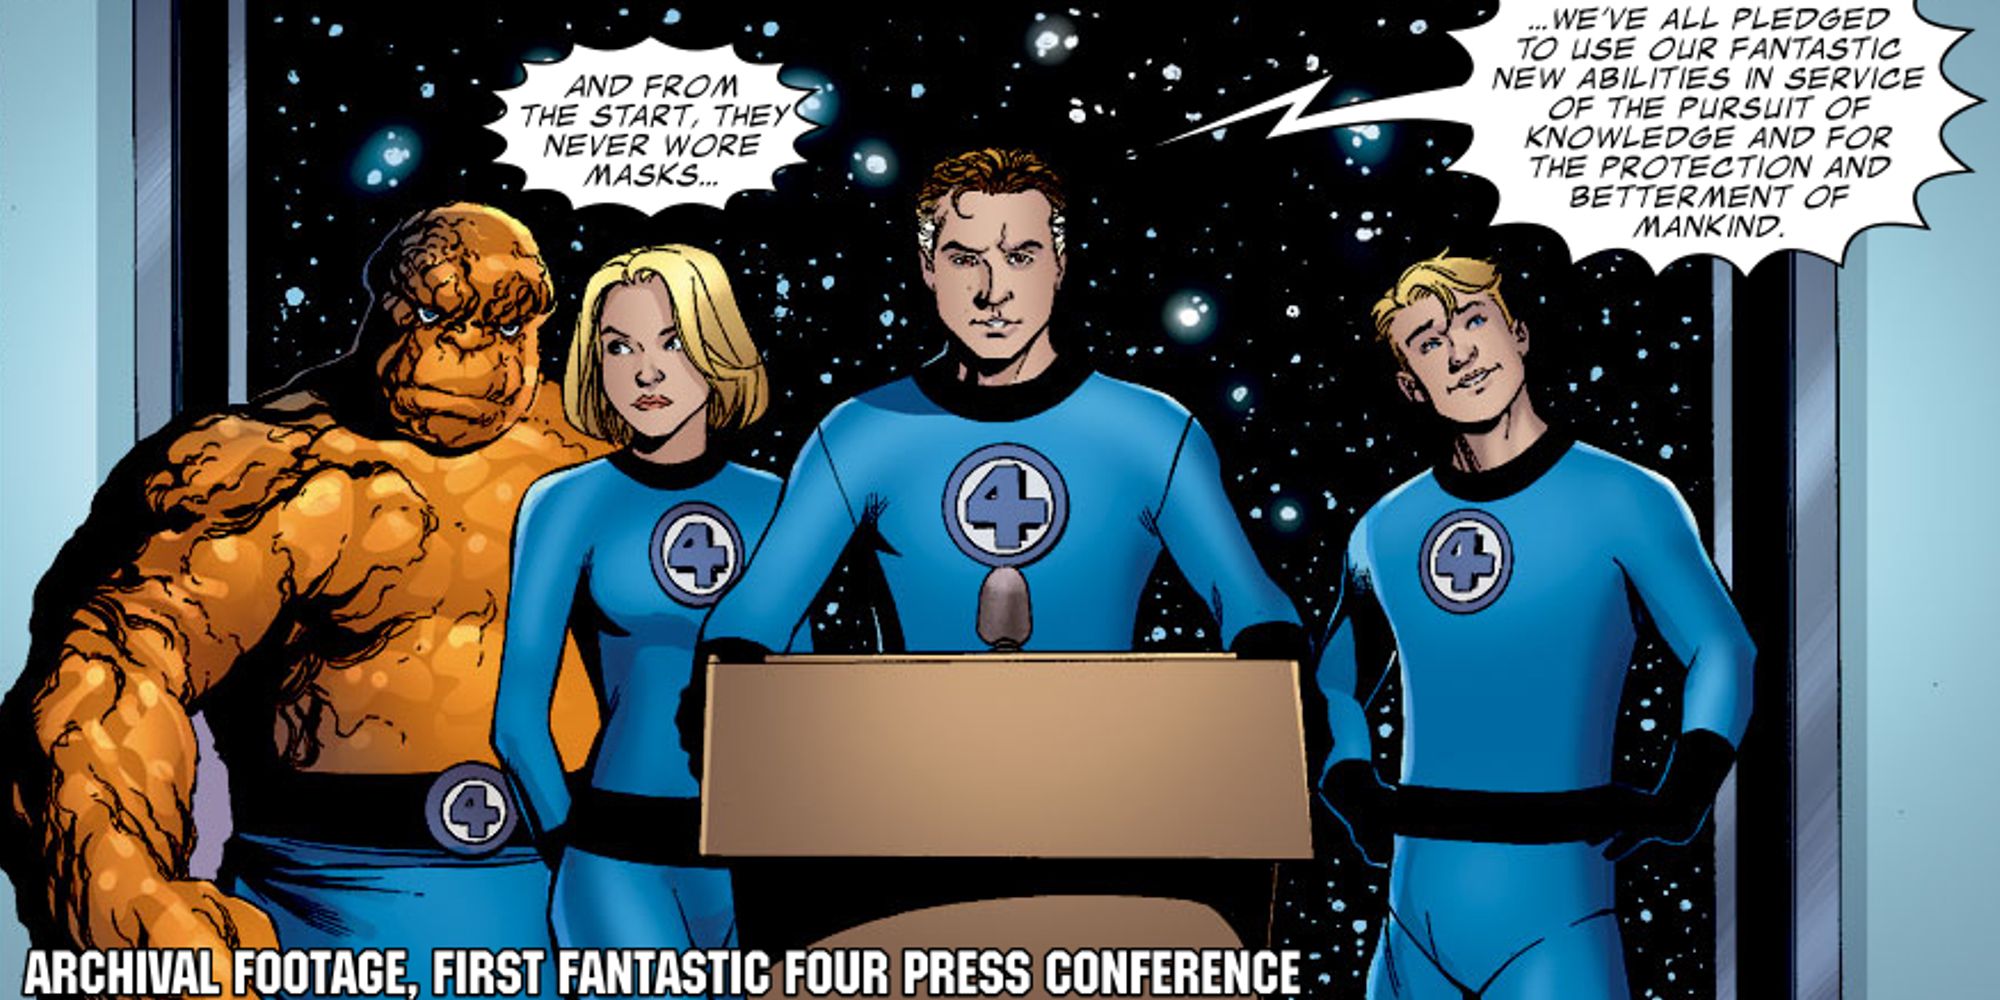 The Fantastic Four speaking at a press conference in Dwayne McDuffie's Fantastic Four run